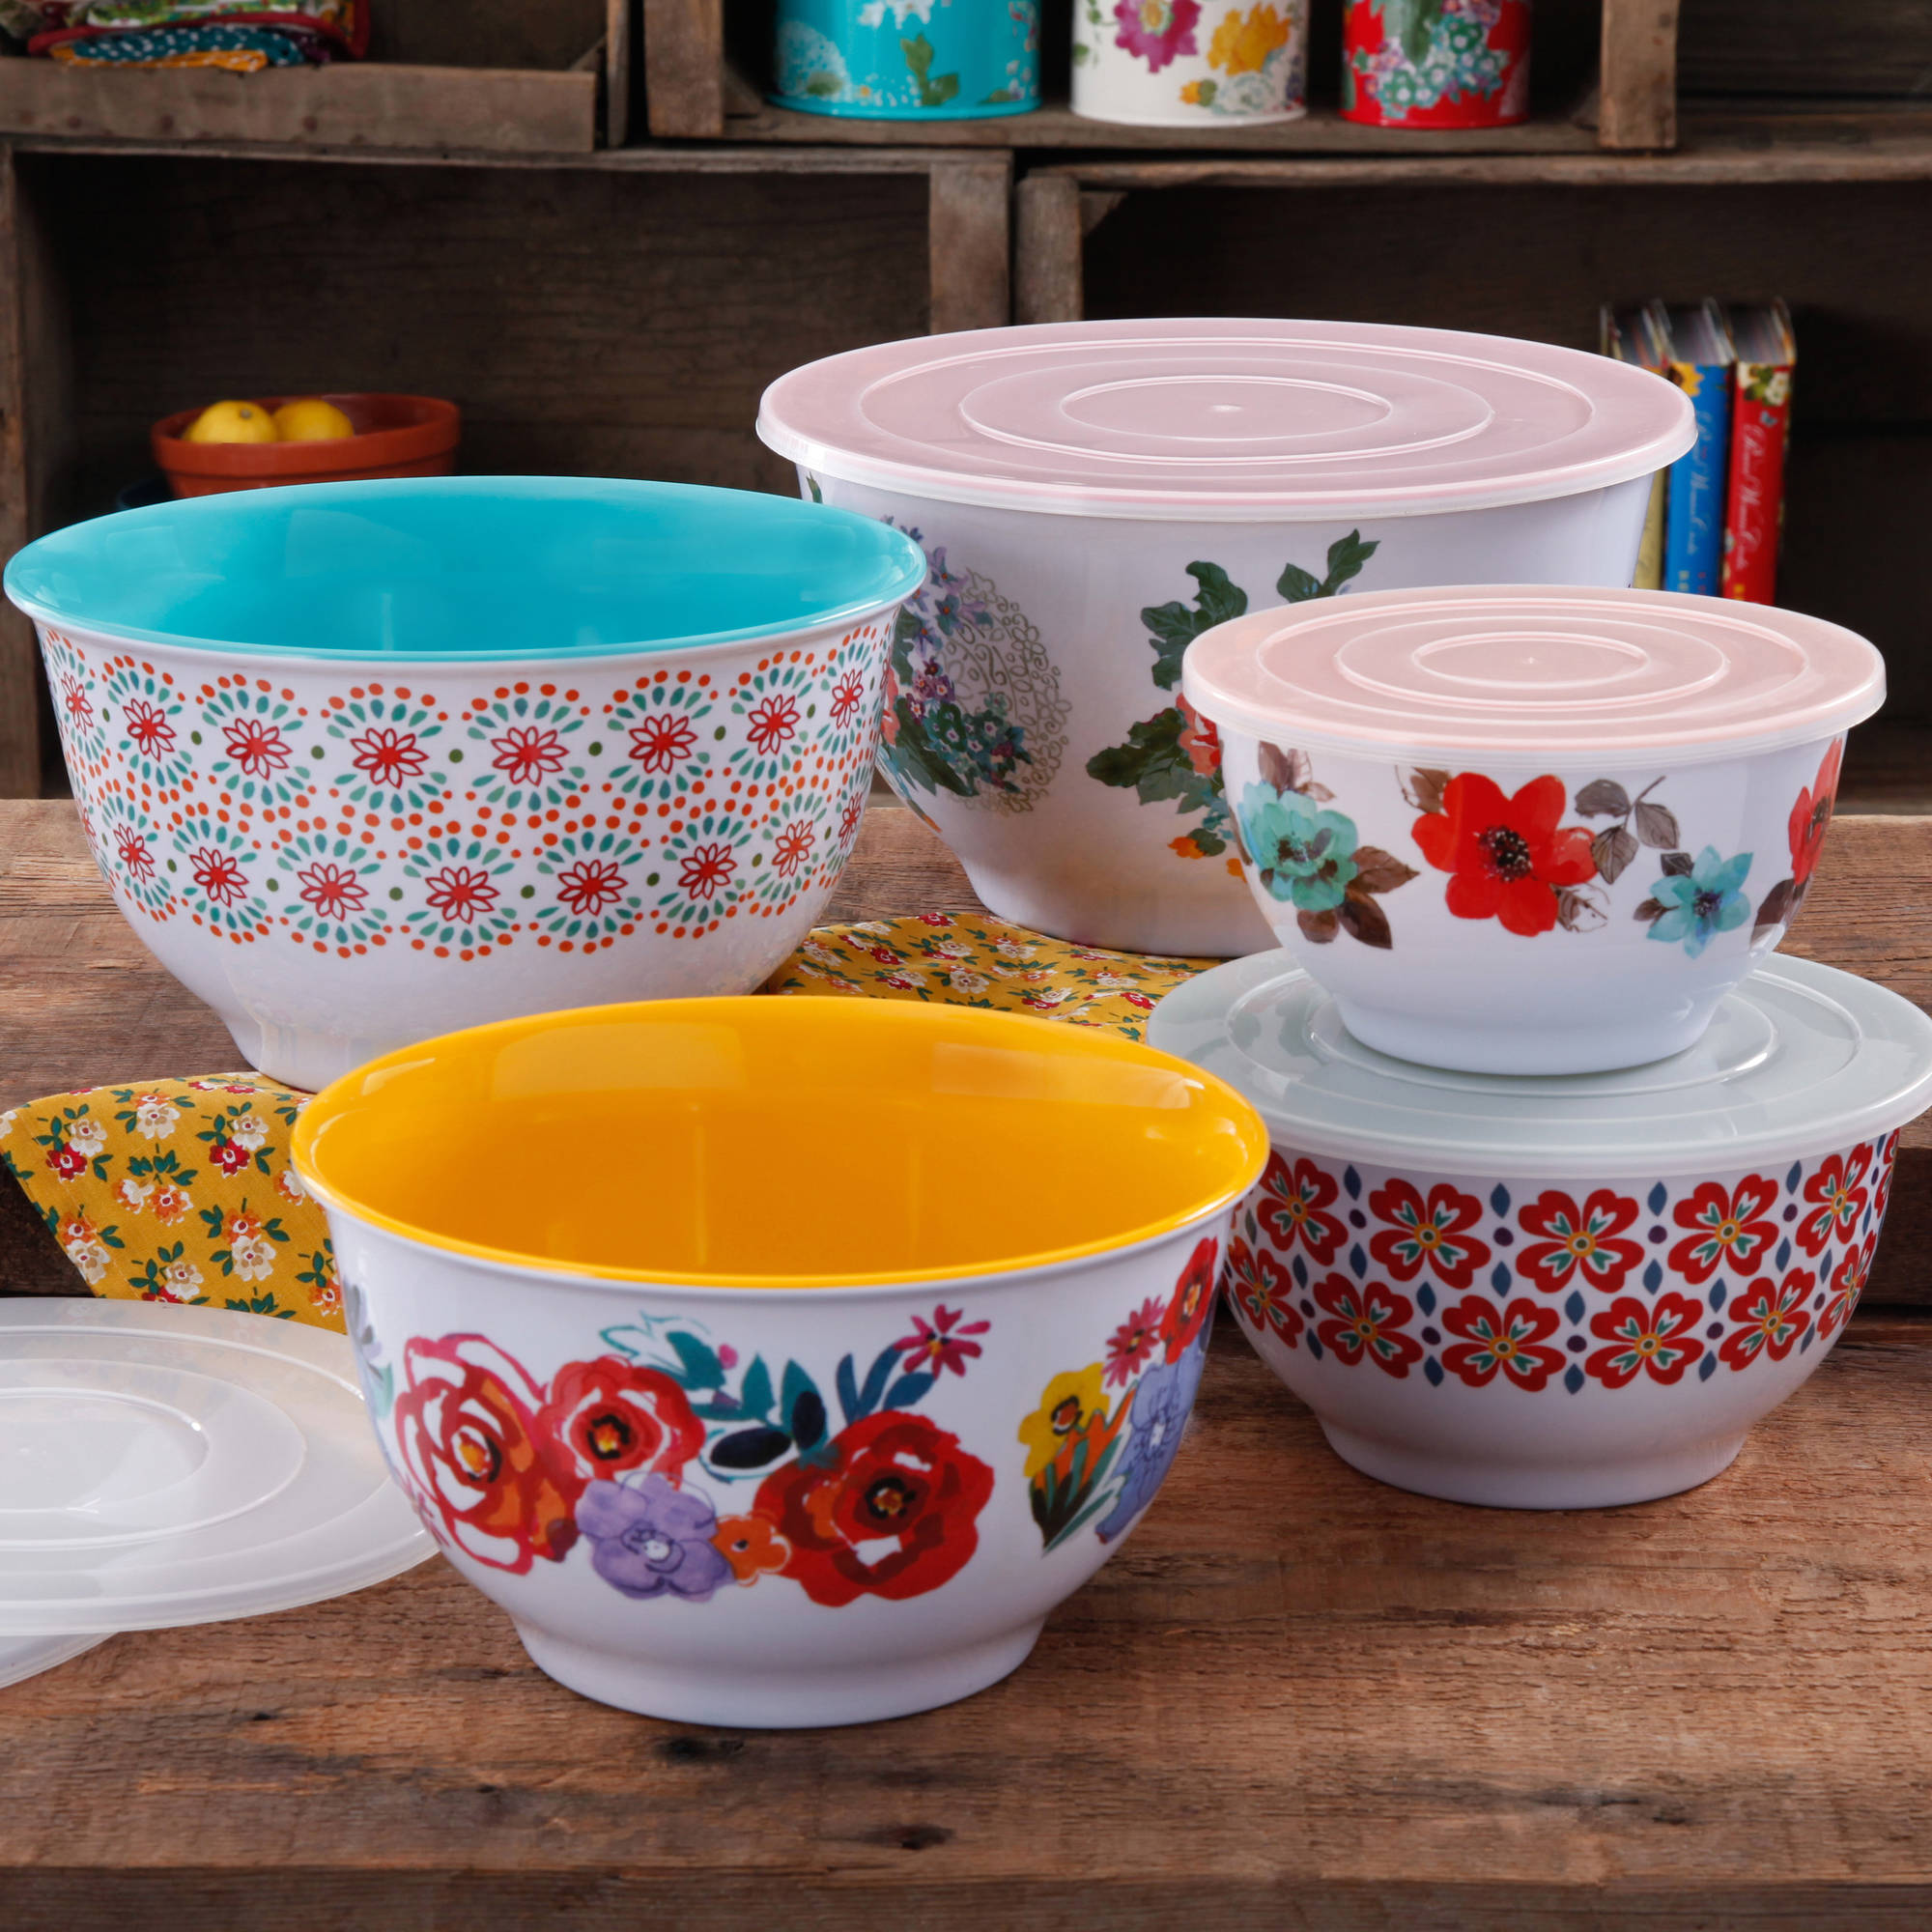 The Pioneer Woman Country Garden Melamine Mixing Bowl Set, 10-Piece Set - image 1 of 7